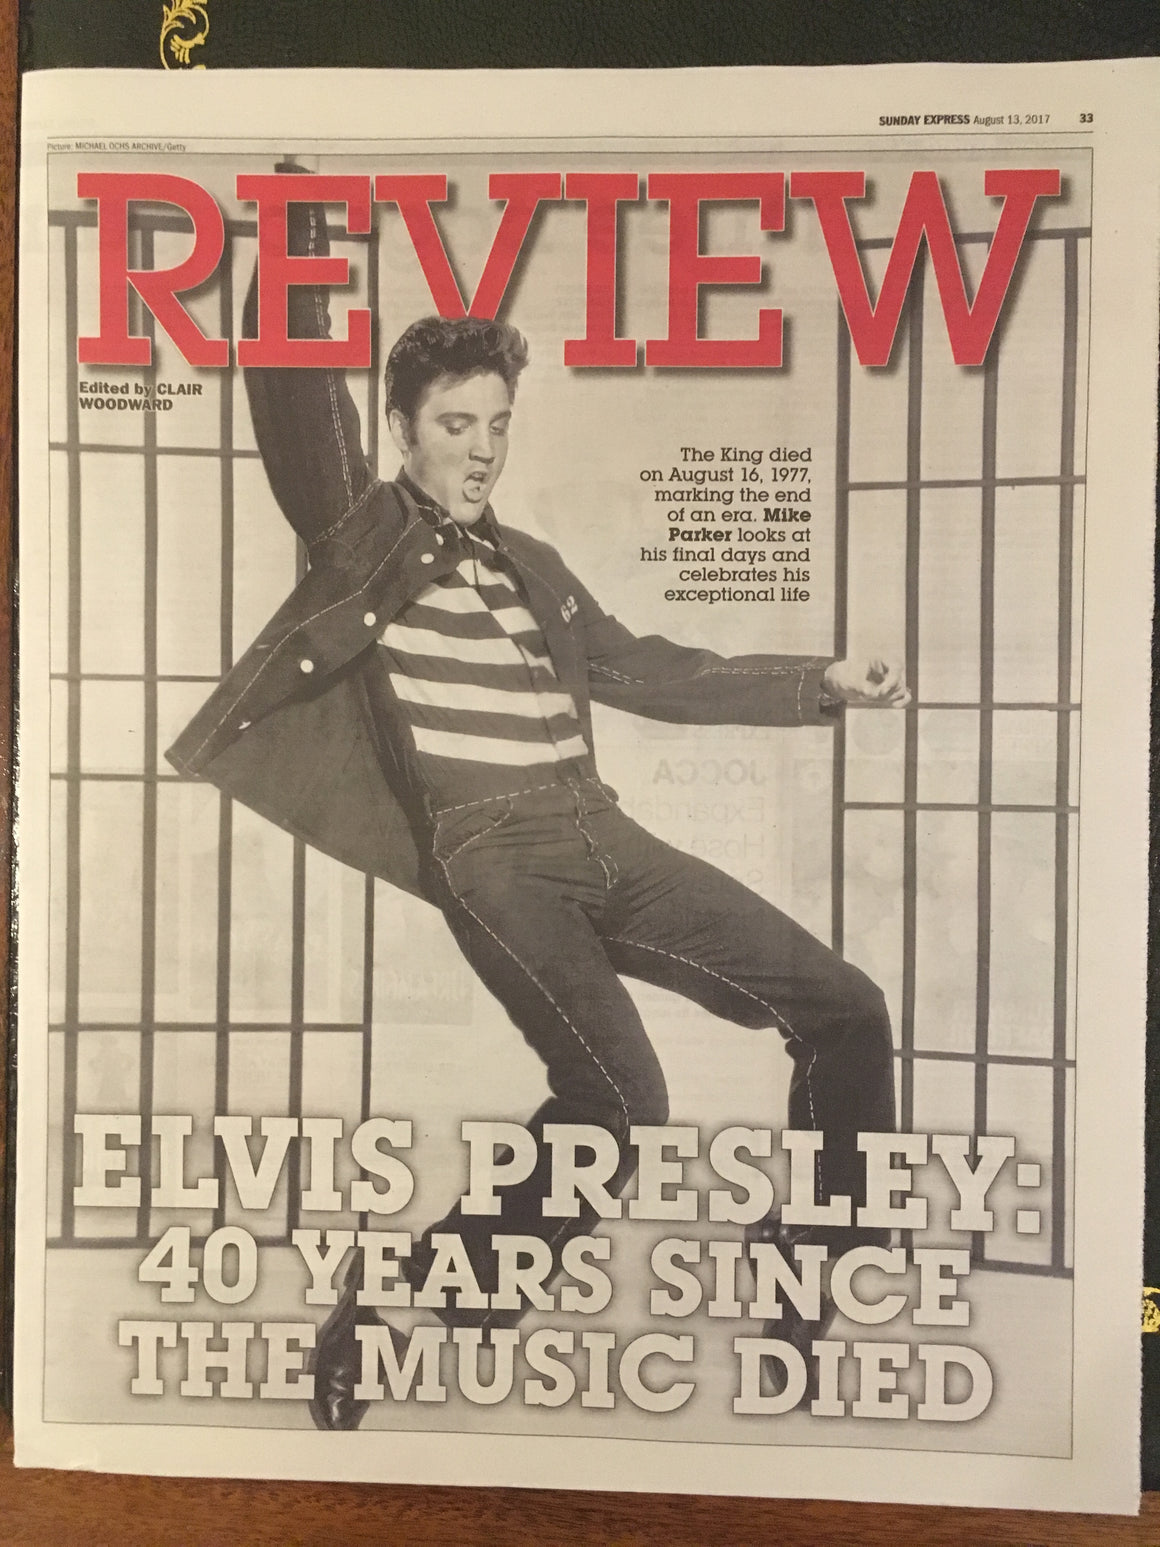 Sunday Express Review 13th August 2017 Elvis Presley 40 Years UK Cover Story